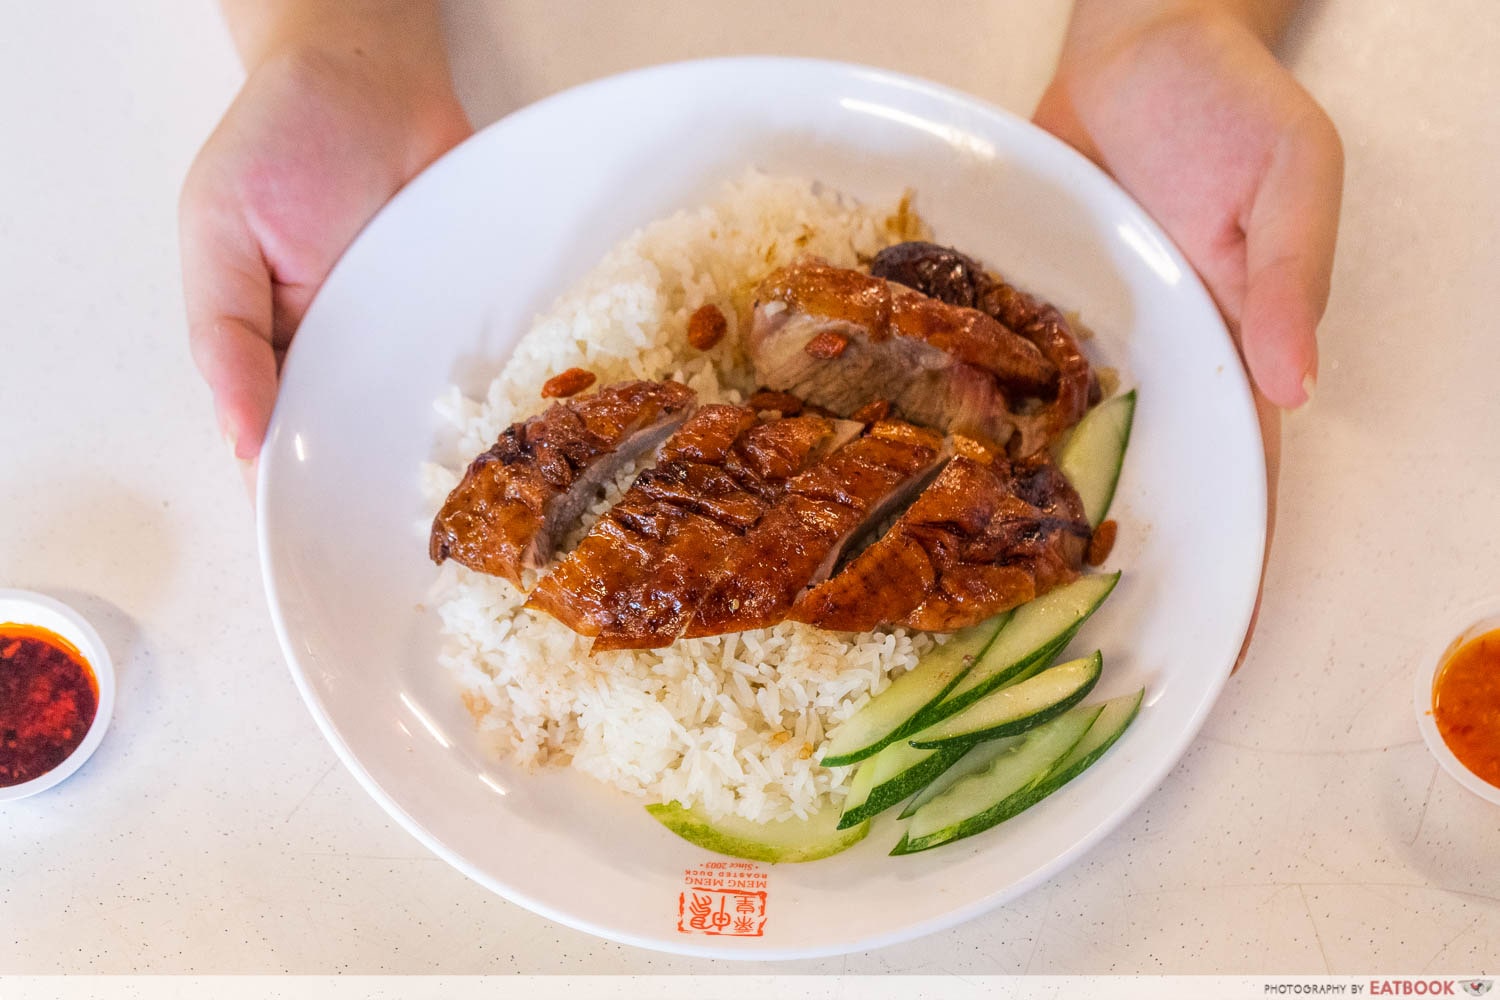 meng meng roasted duck (roasted duck rice)